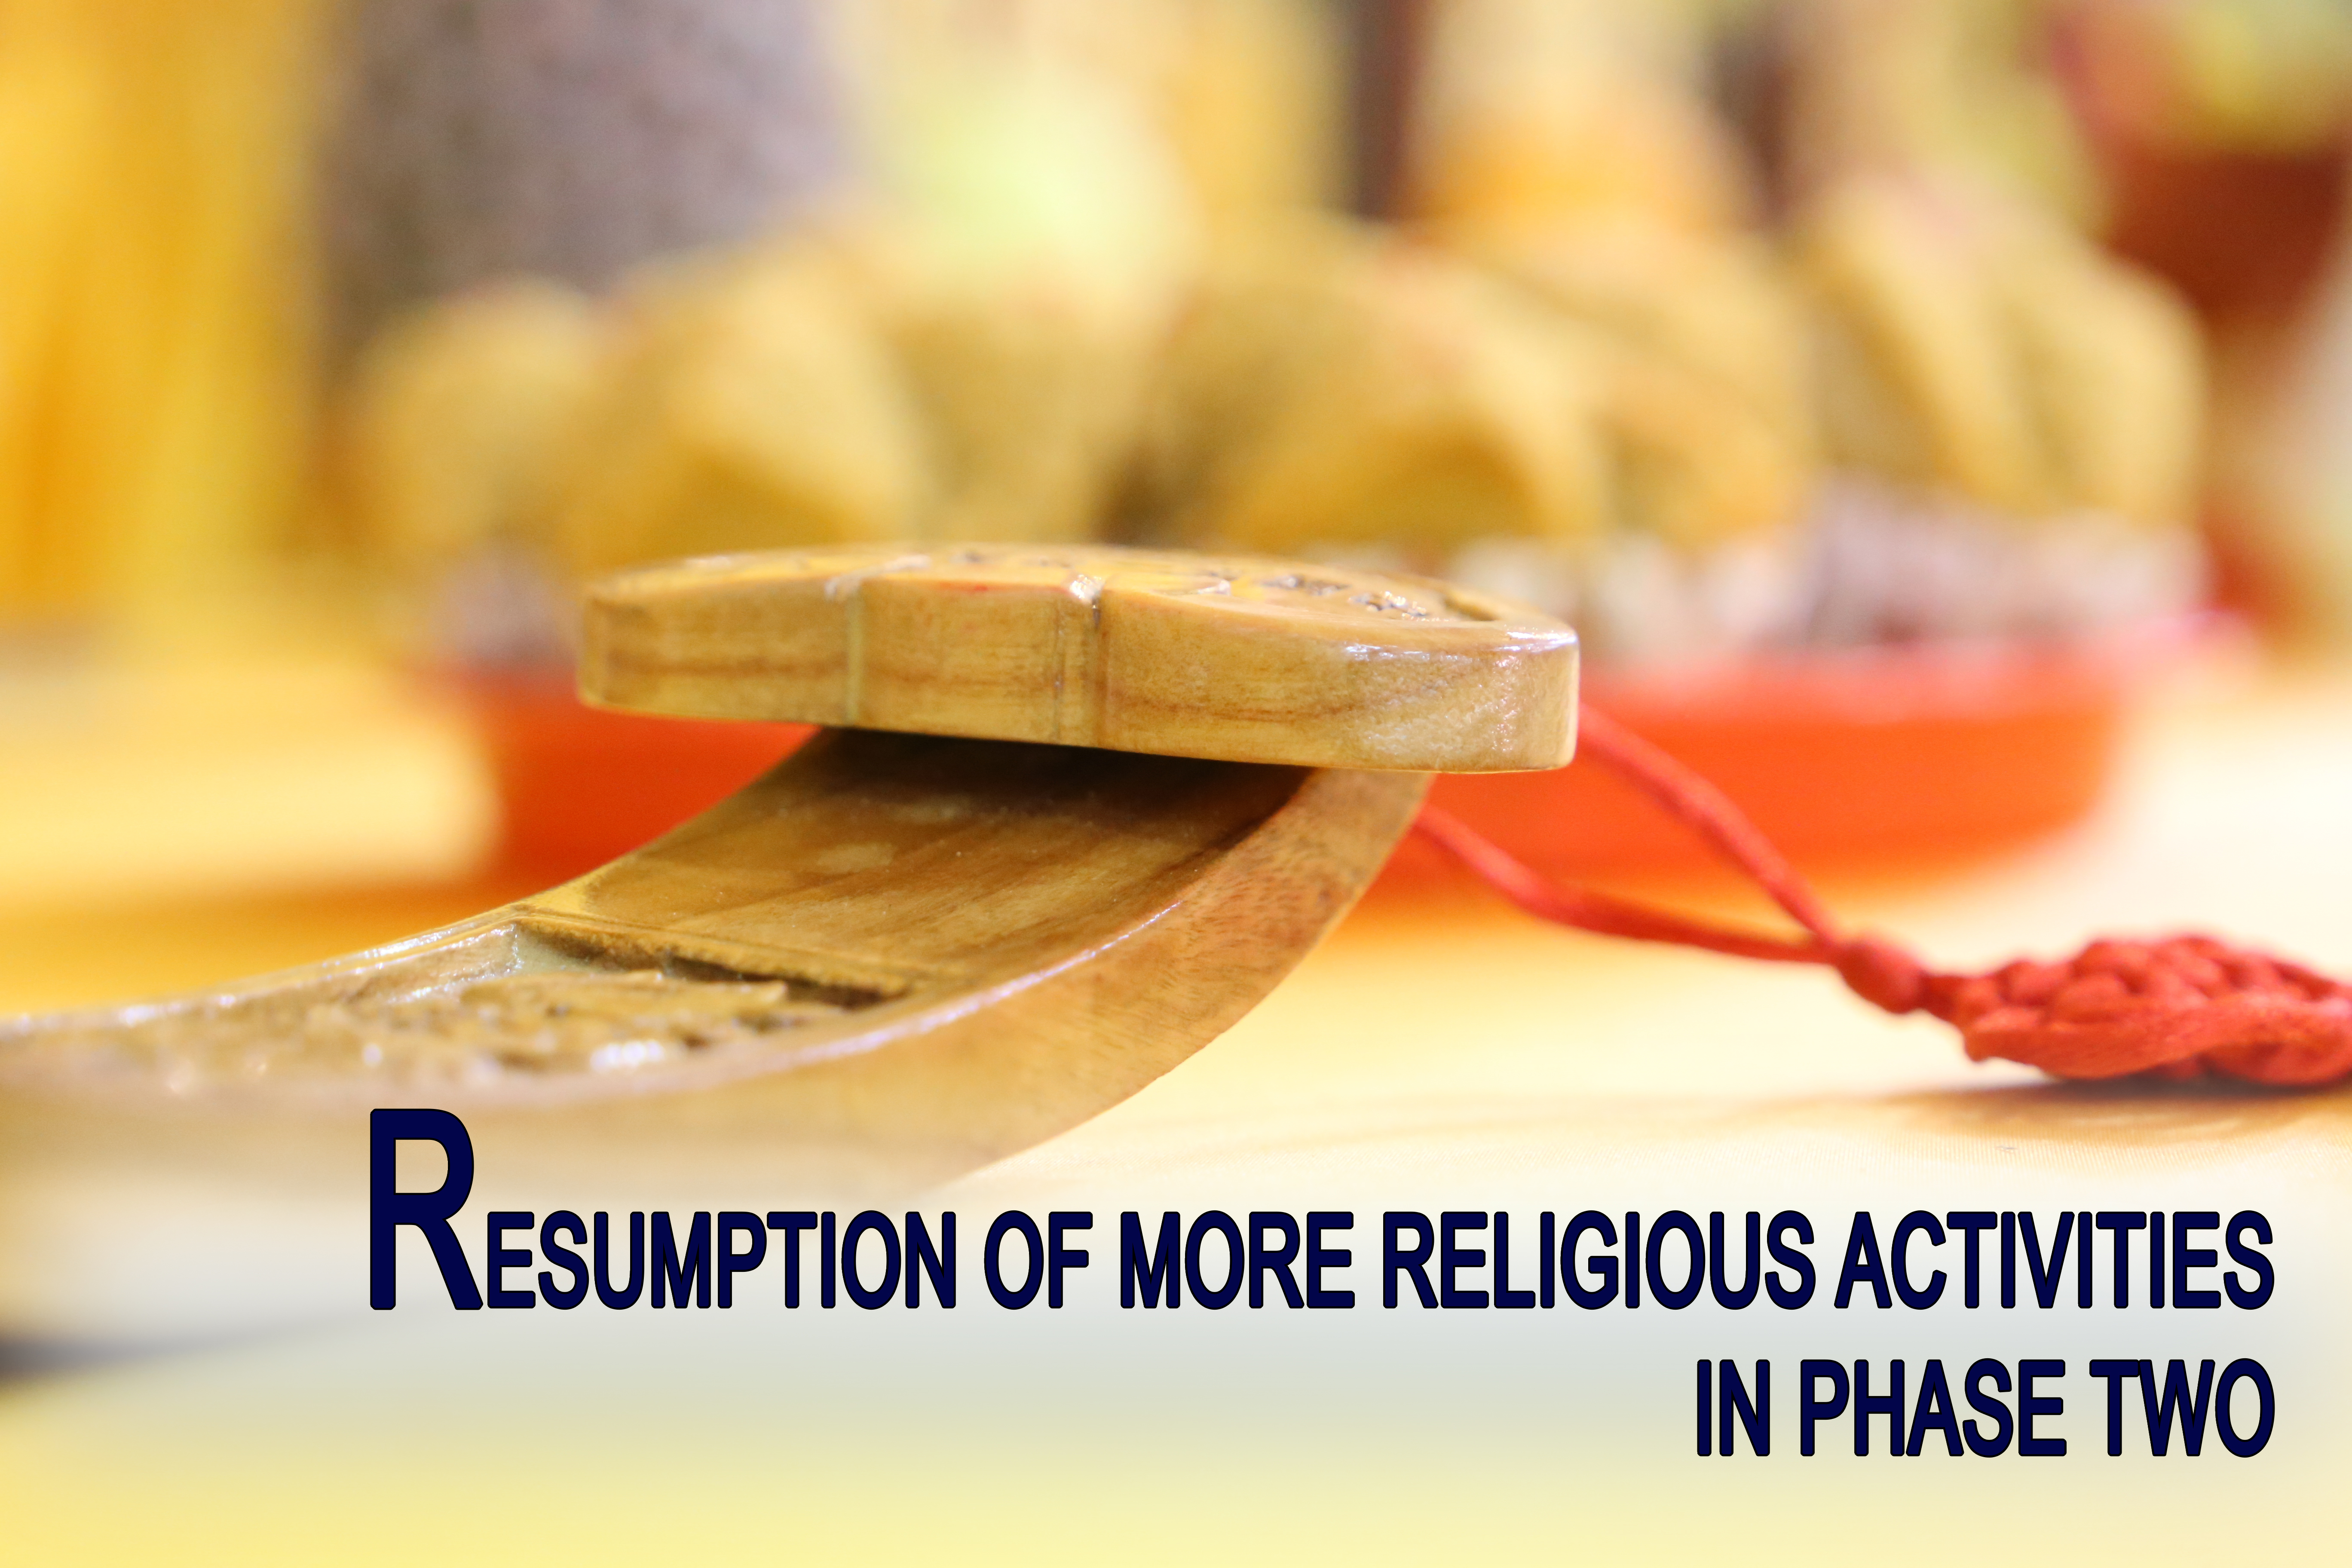 RESUMPTION OF MORE RELIGIOUS ACTIVITIES IN PHASE TWO